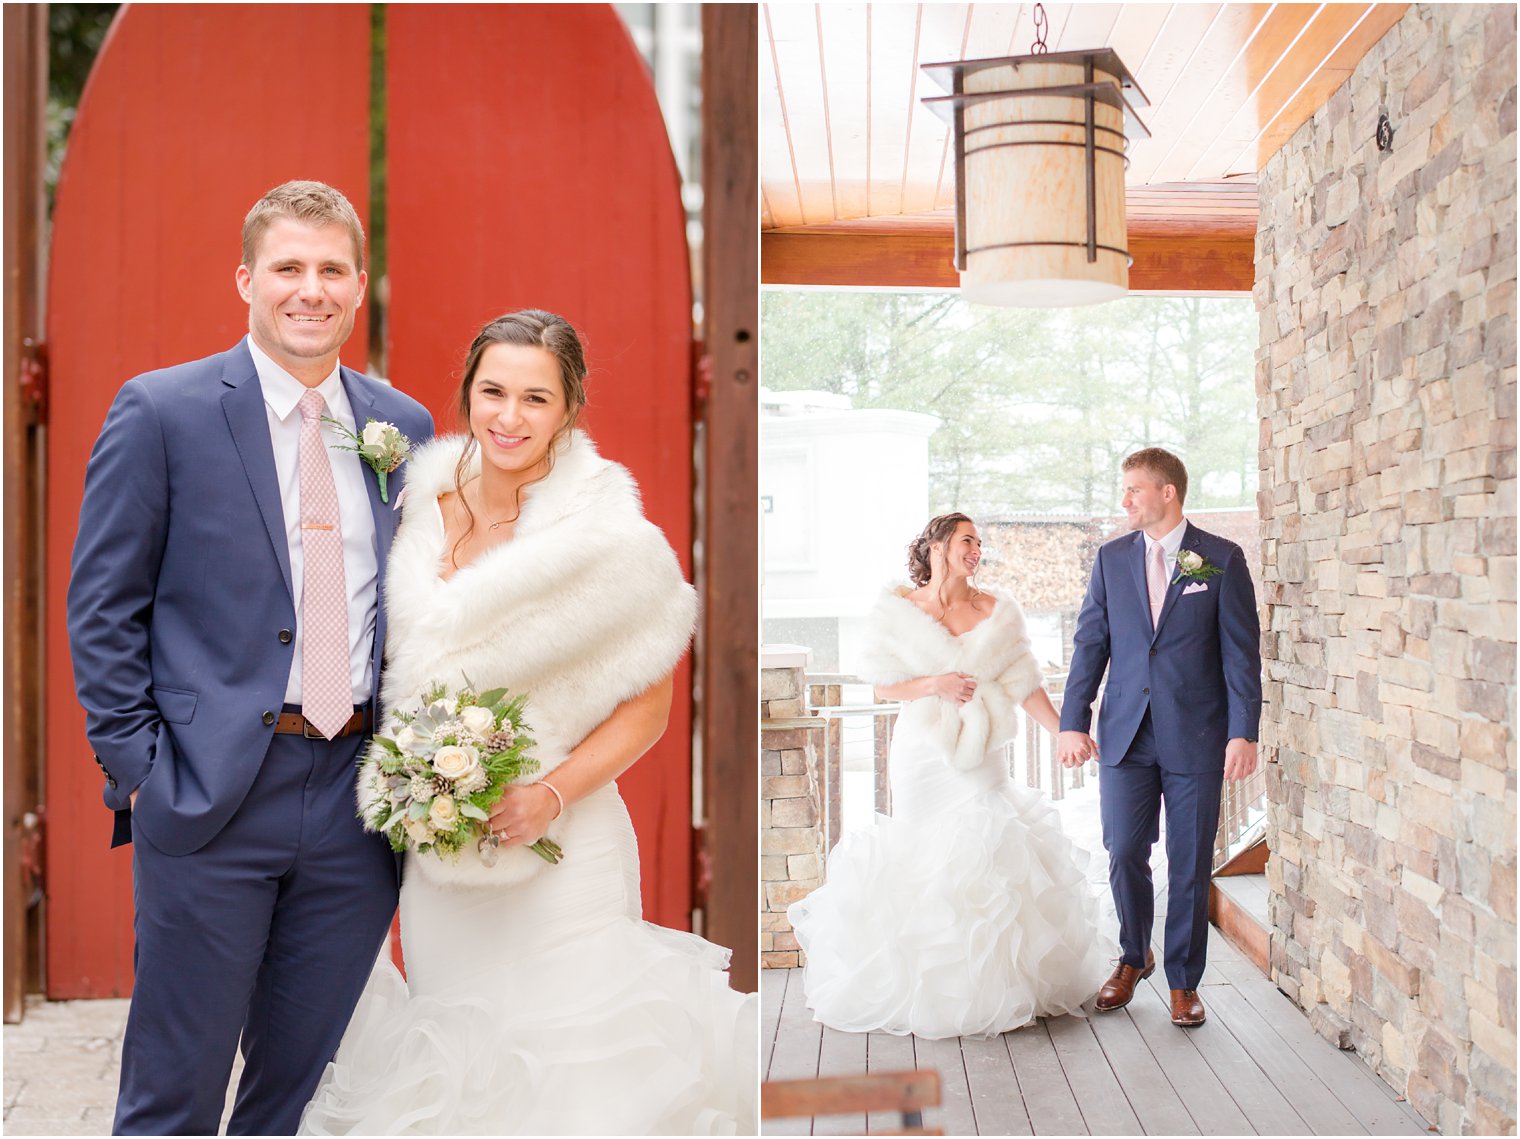 Formal portraits of bride and groom | Stone House at Stirling Ridge in Warren, NJ